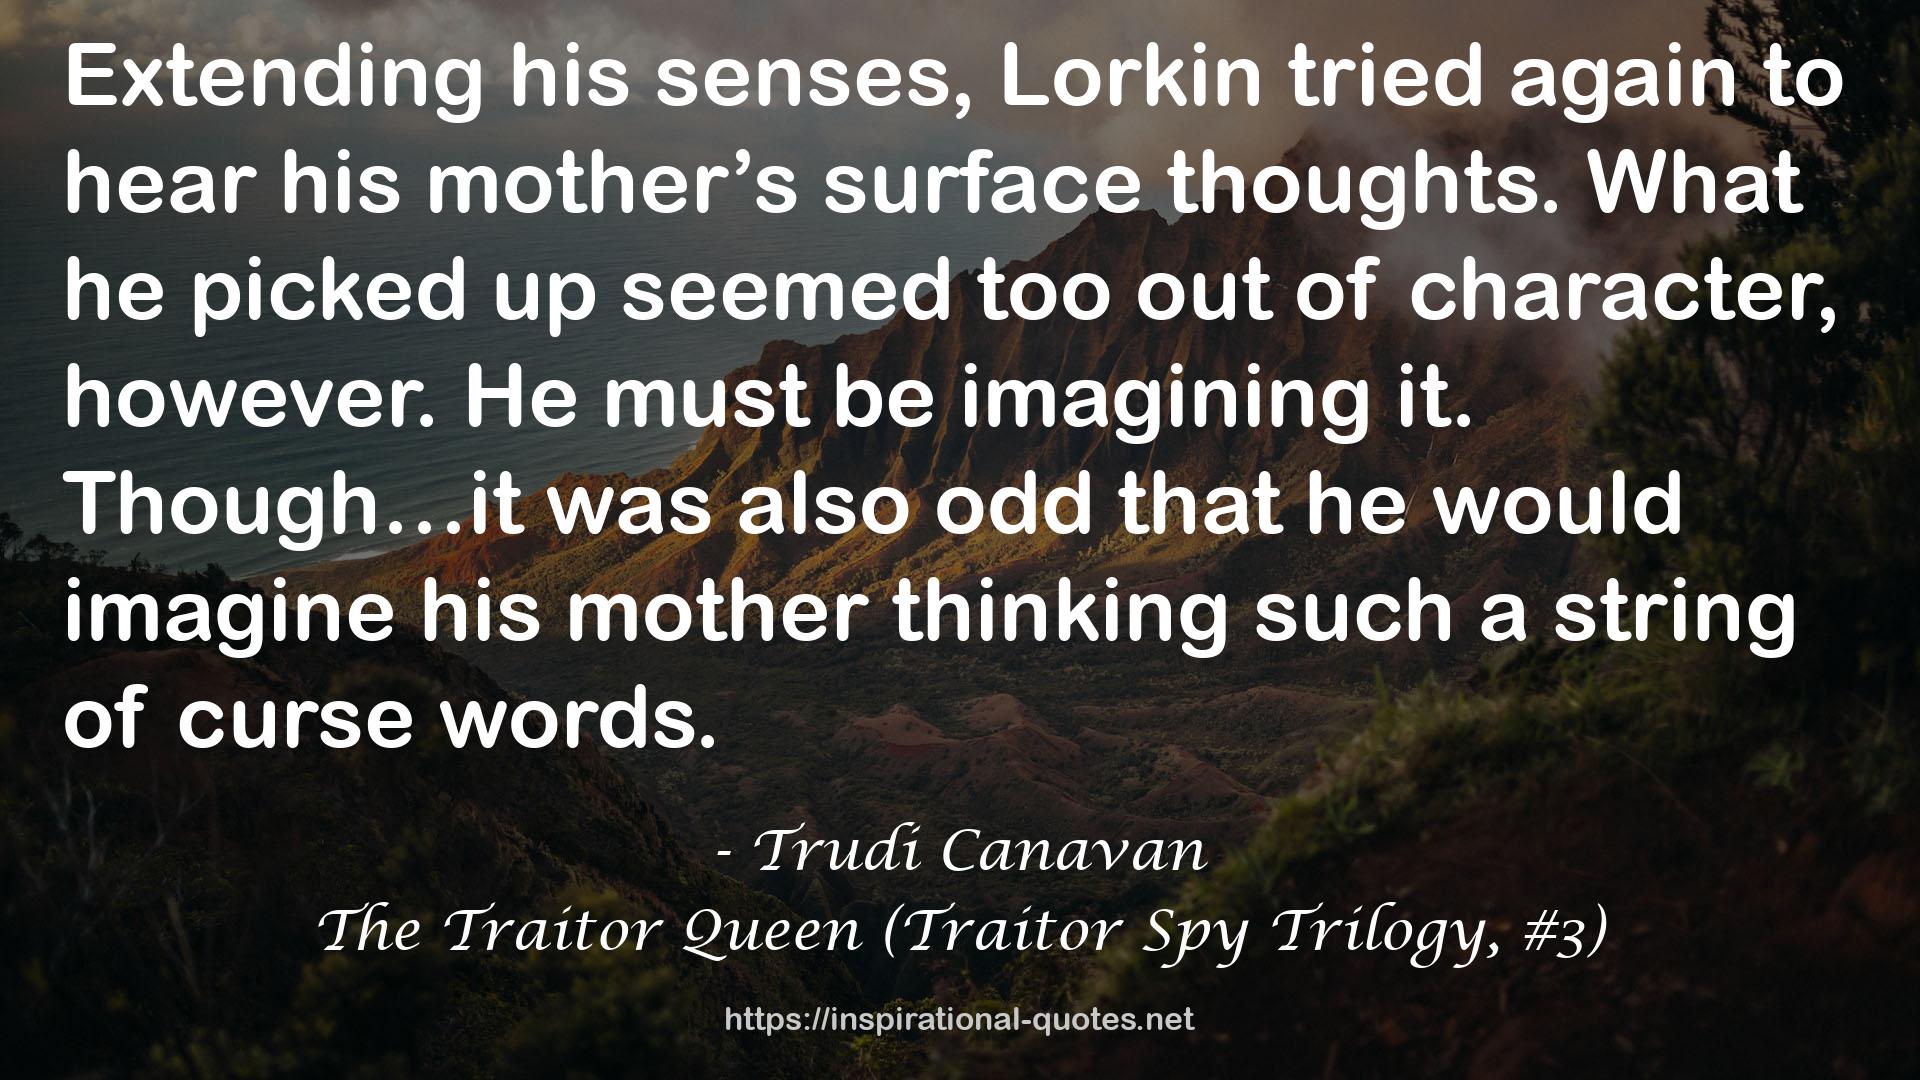 The Traitor Queen (Traitor Spy Trilogy, #3) QUOTES